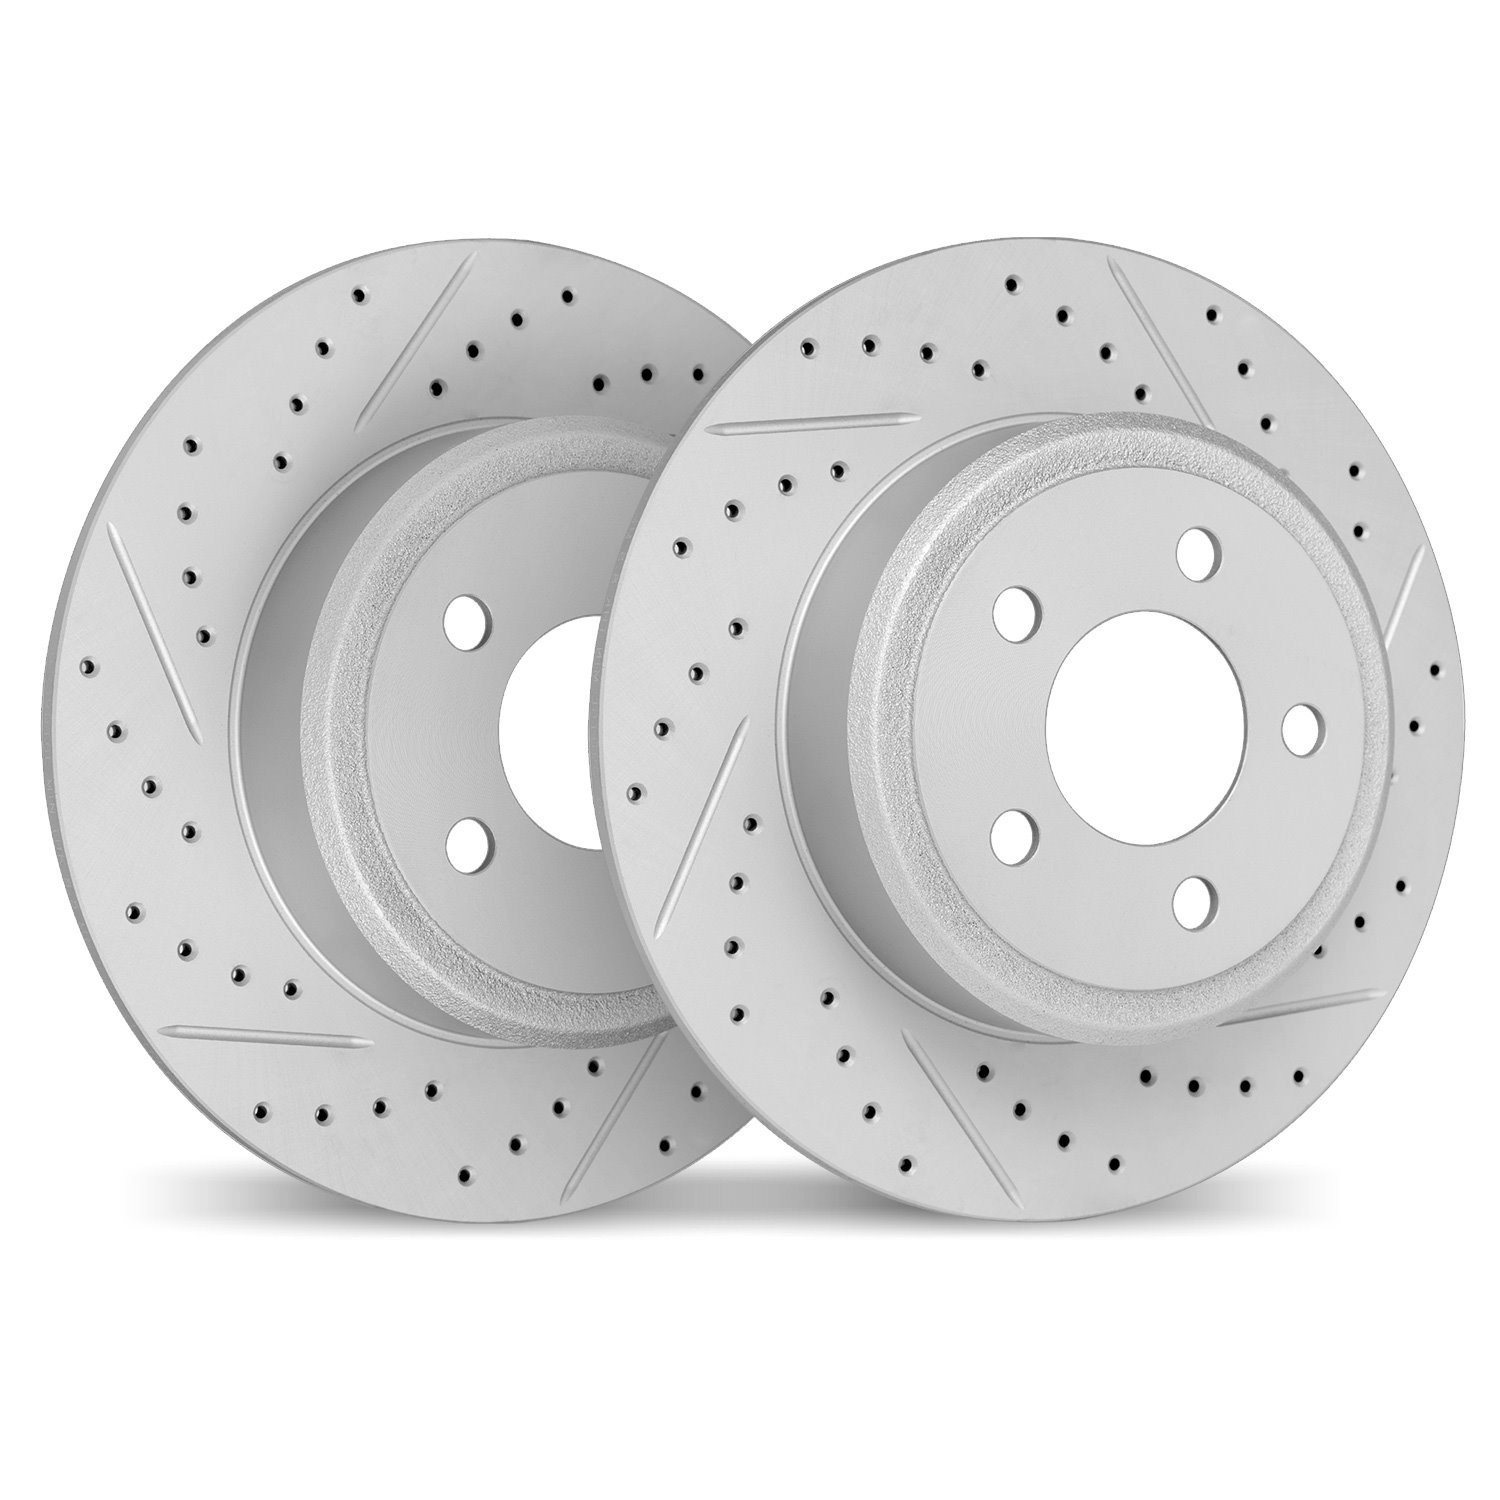 2002-47033 Geoperformance Drilled/Slotted Brake Rotors, 2001-2007 GM, Position: Rear